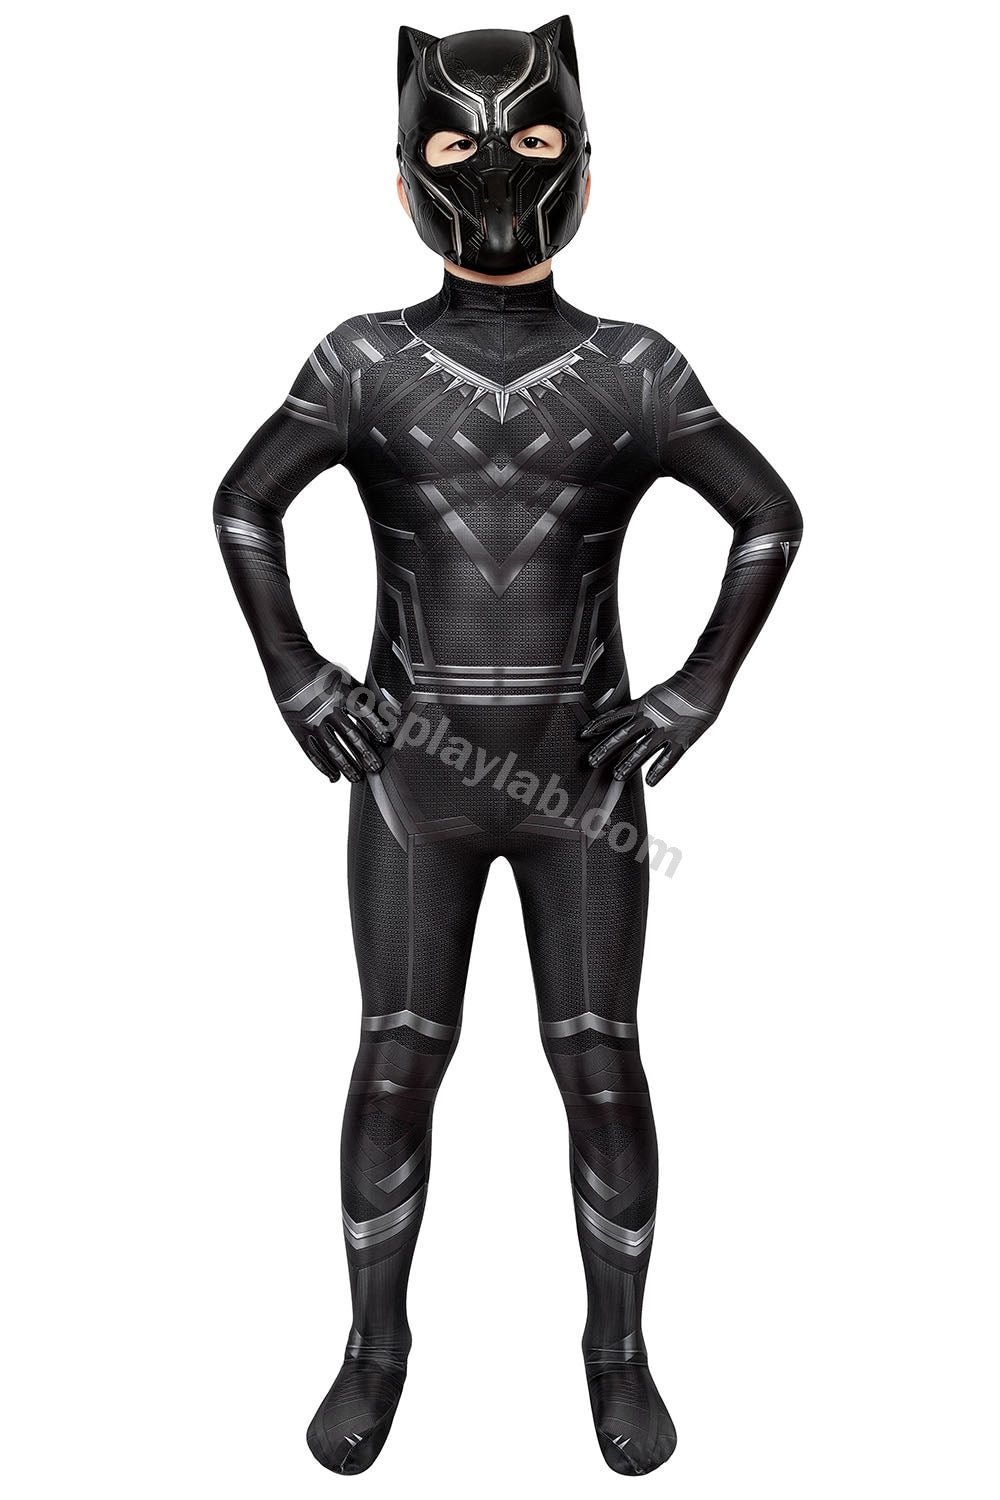 Kids Black Panther Cosplay Costume Civil War Edition For Children Halloween By CosplayLab